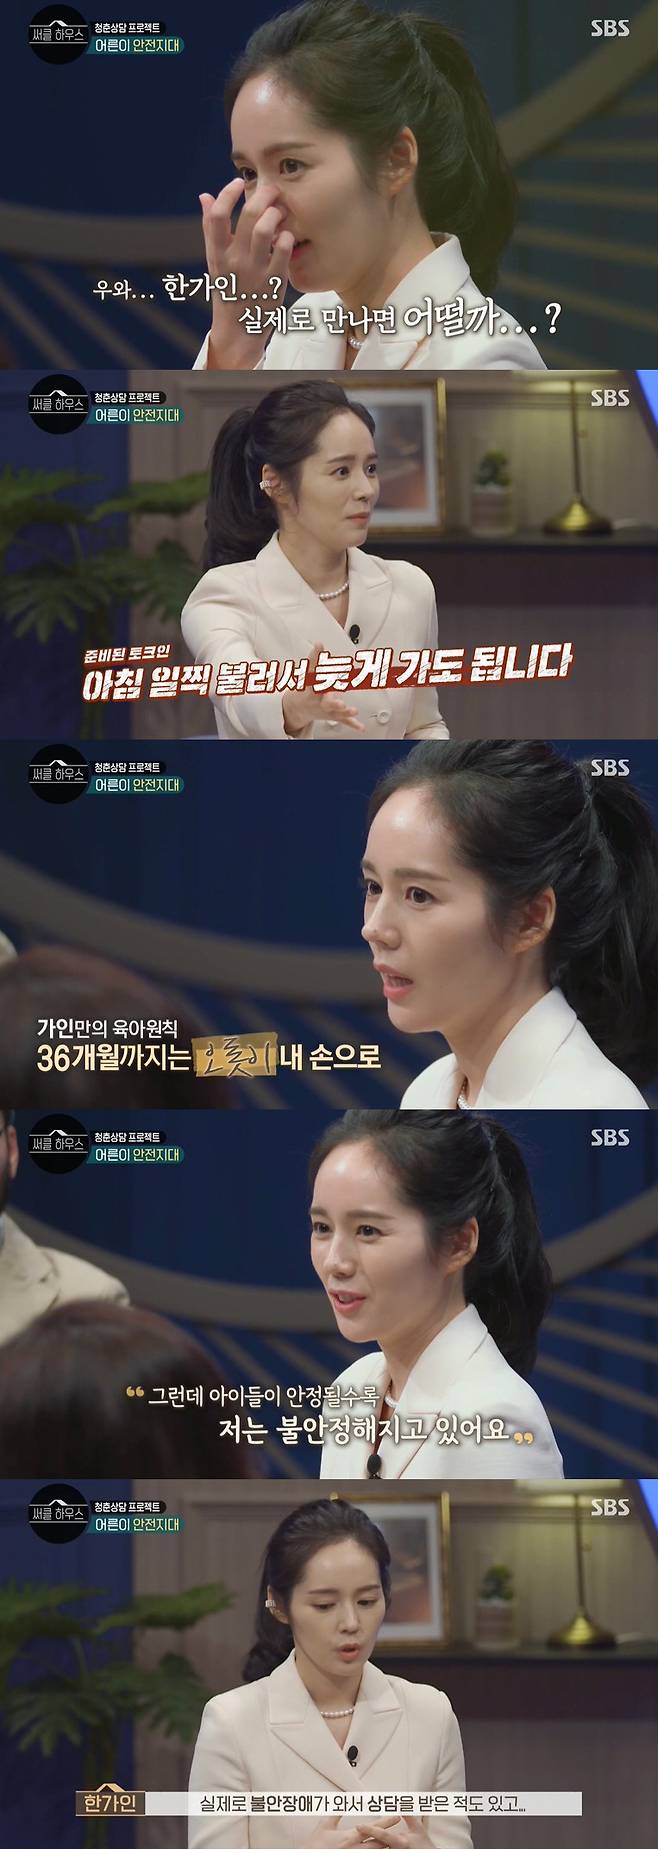 Actor Han Ga-in has made a difficult family history Confessions.In SBS circle house which was broadcasted on the afternoon of the 24th, Han Ga-in, who was in the first fixed entertainment challenge since his debut, was drawn.On this day, Han Ga-in showed a high tension in the form of liberation from the child care of two children for a long time. Han Ga-in said, I do not want to go home.I can call early in the morning and go late, he said. It was a rule to raise my hand unconditionally until 36 months. Fortunately, it was possible because it was a job that could control things.There are many mothers who do not want to do it, he said.Han Ga-in, who has this extraordinary parenting philosophy, but there were more difficulties than I imagined. Han Ga-in said, In fact, the more attached and stable I became unstable.In fact, I had a lot of laughter and pranks, but at some point I was less able to speak.I have nothing to do but talk about dinosaurs because I talk to my child. In fact, Han Ga-in was a non-marriageist who had no intention of marriage.Han Ga-in, who was hurt by his fathers affair when he was a child, said, I did not have a happy childhood and there was a hard Sigi. My heart about my father is not hate.I do not feel hateful and feel insensitive. I lived in such a family, so I looked so good when I went to my husbands house. Han Ga-in said, I wanted to be a member of the family because I got married early. I am too healed when my husband looks after my child.There are times when I get tears, she said, showing tears with Confessions.Also, for Han Ga-in and Yeon Jung-hoon, who had not had children for 11 years after marriage, Fathers Affairs was followed and hurt by related search words.Han Ga-in said: I felt like I was too young to be responsible, so I didnt have it after consulting my husband.(And then) the Fathers Affair followed in the related search term, even though he never tried to have children.I was happy to have a child with my choice, but it was not good because of peoples attention. 